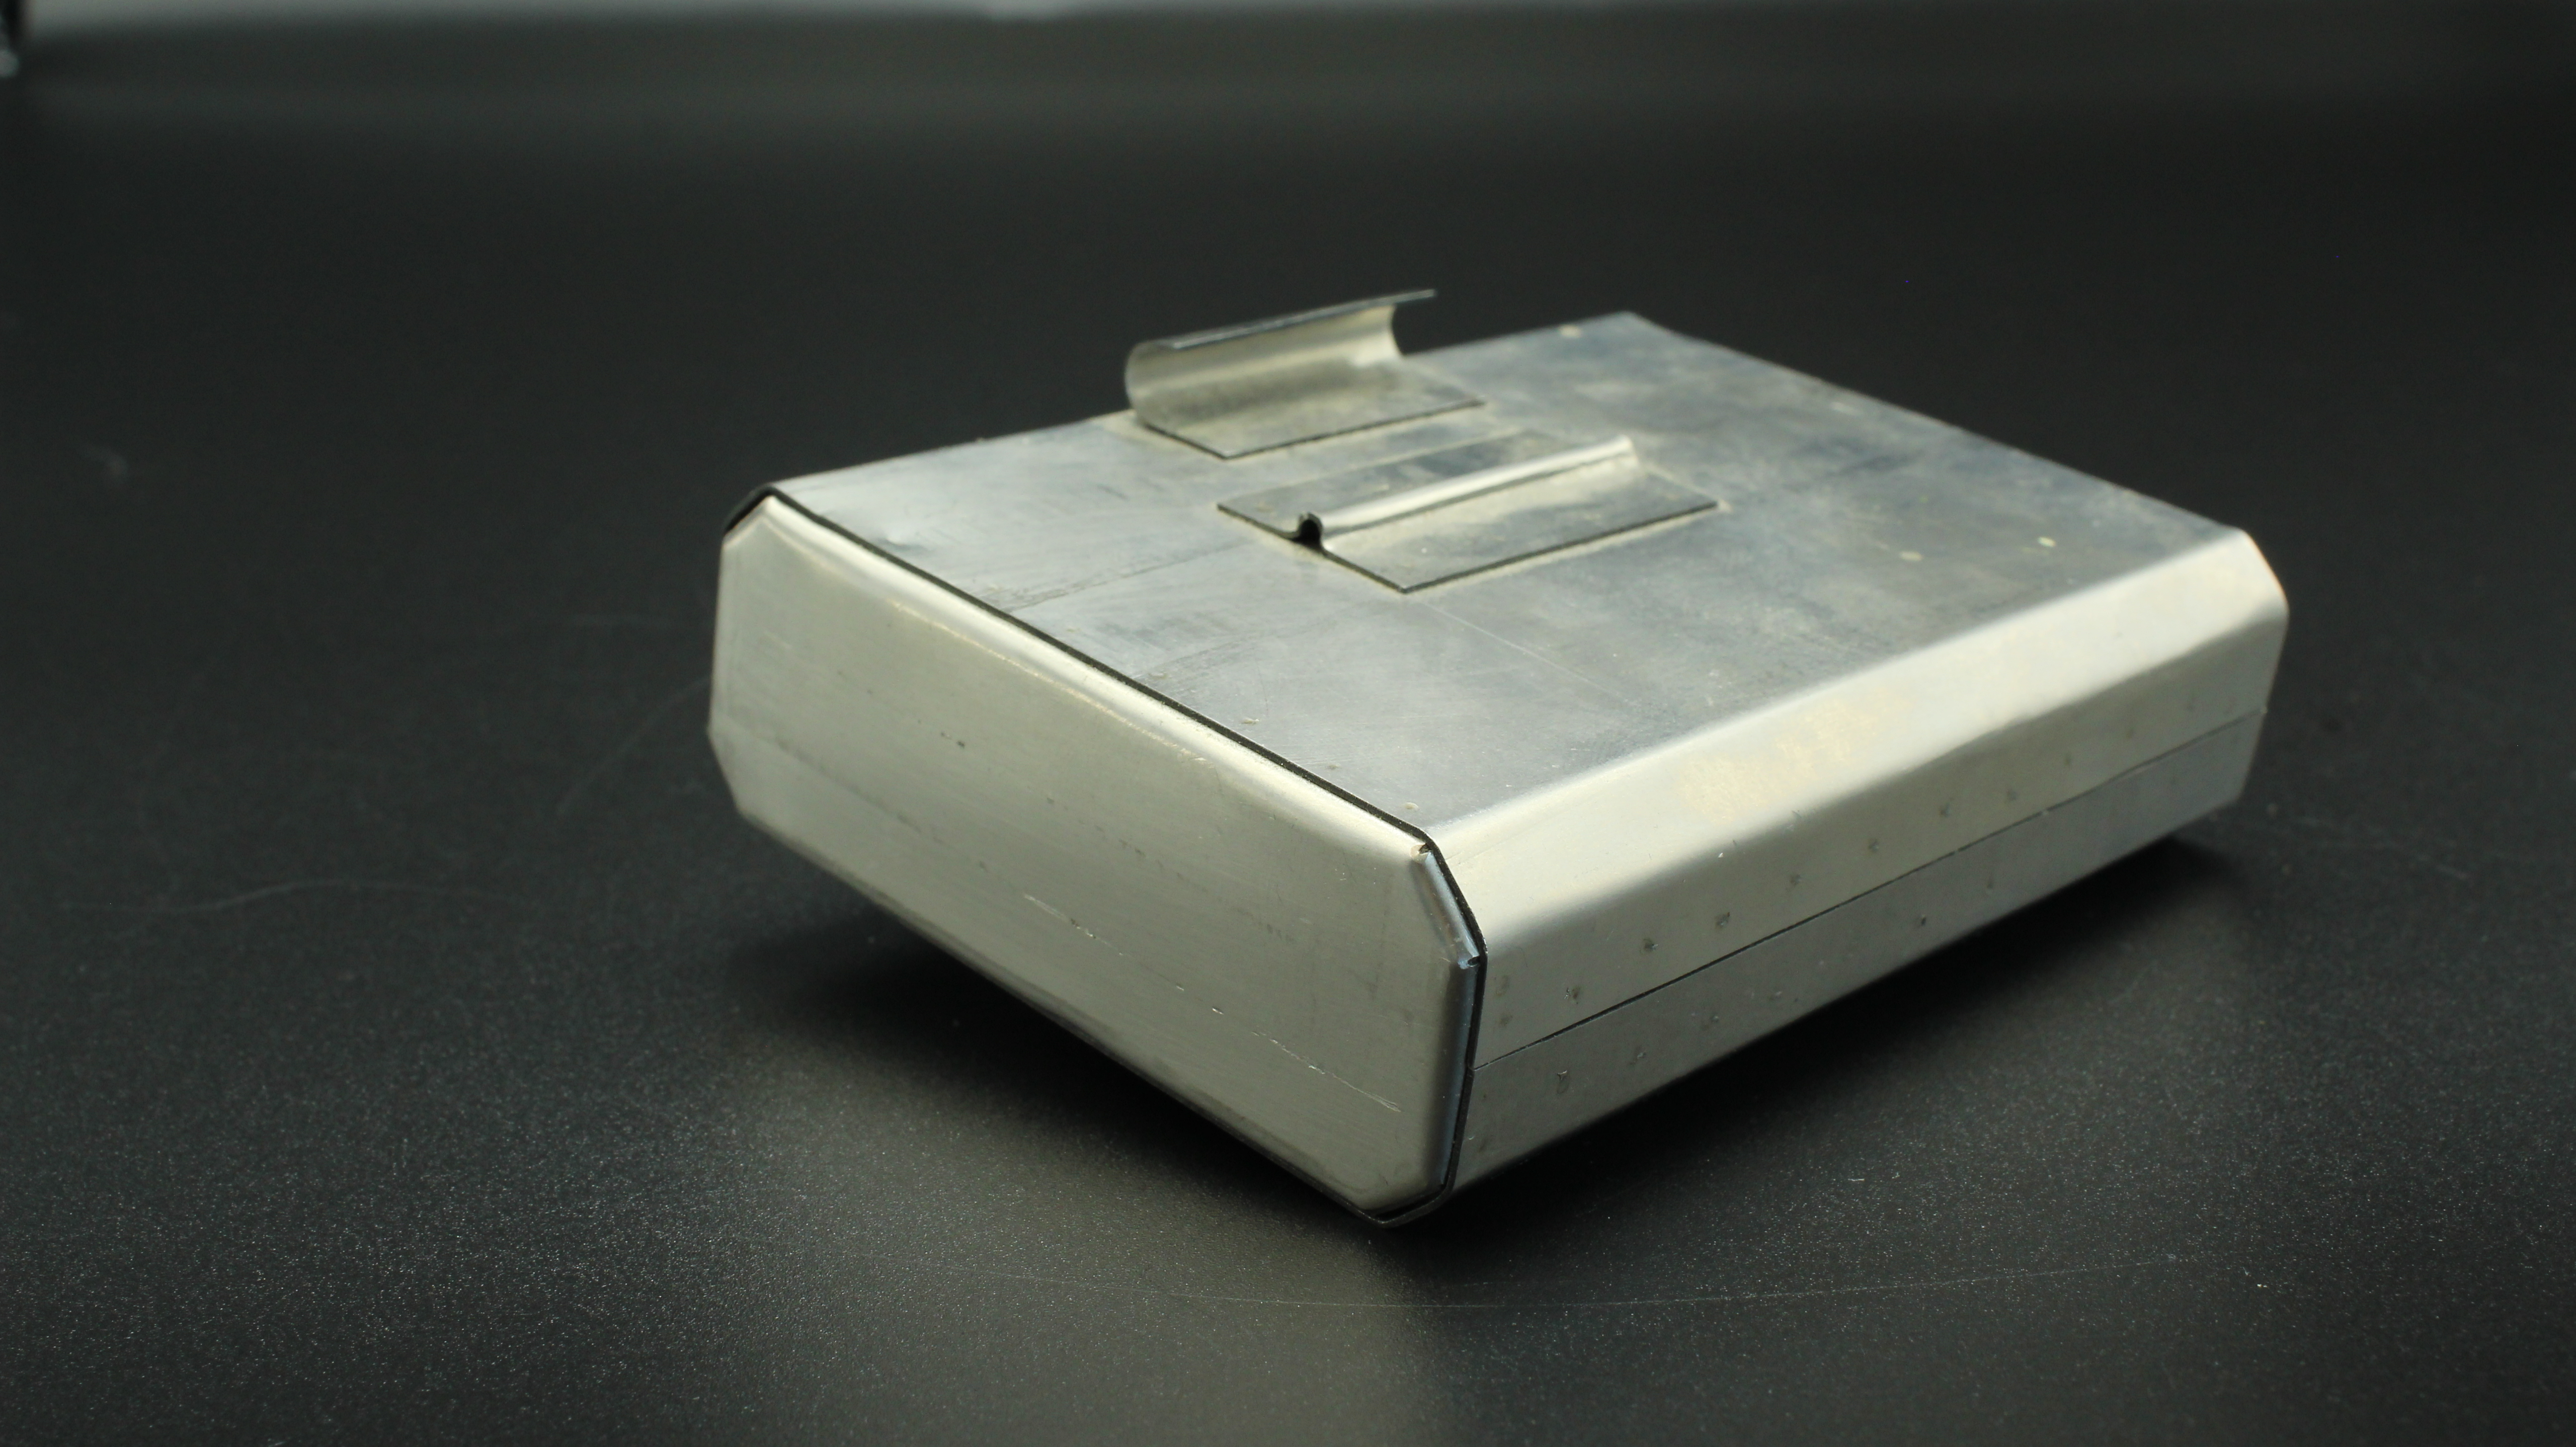 Susceptor box with Inconel alloy